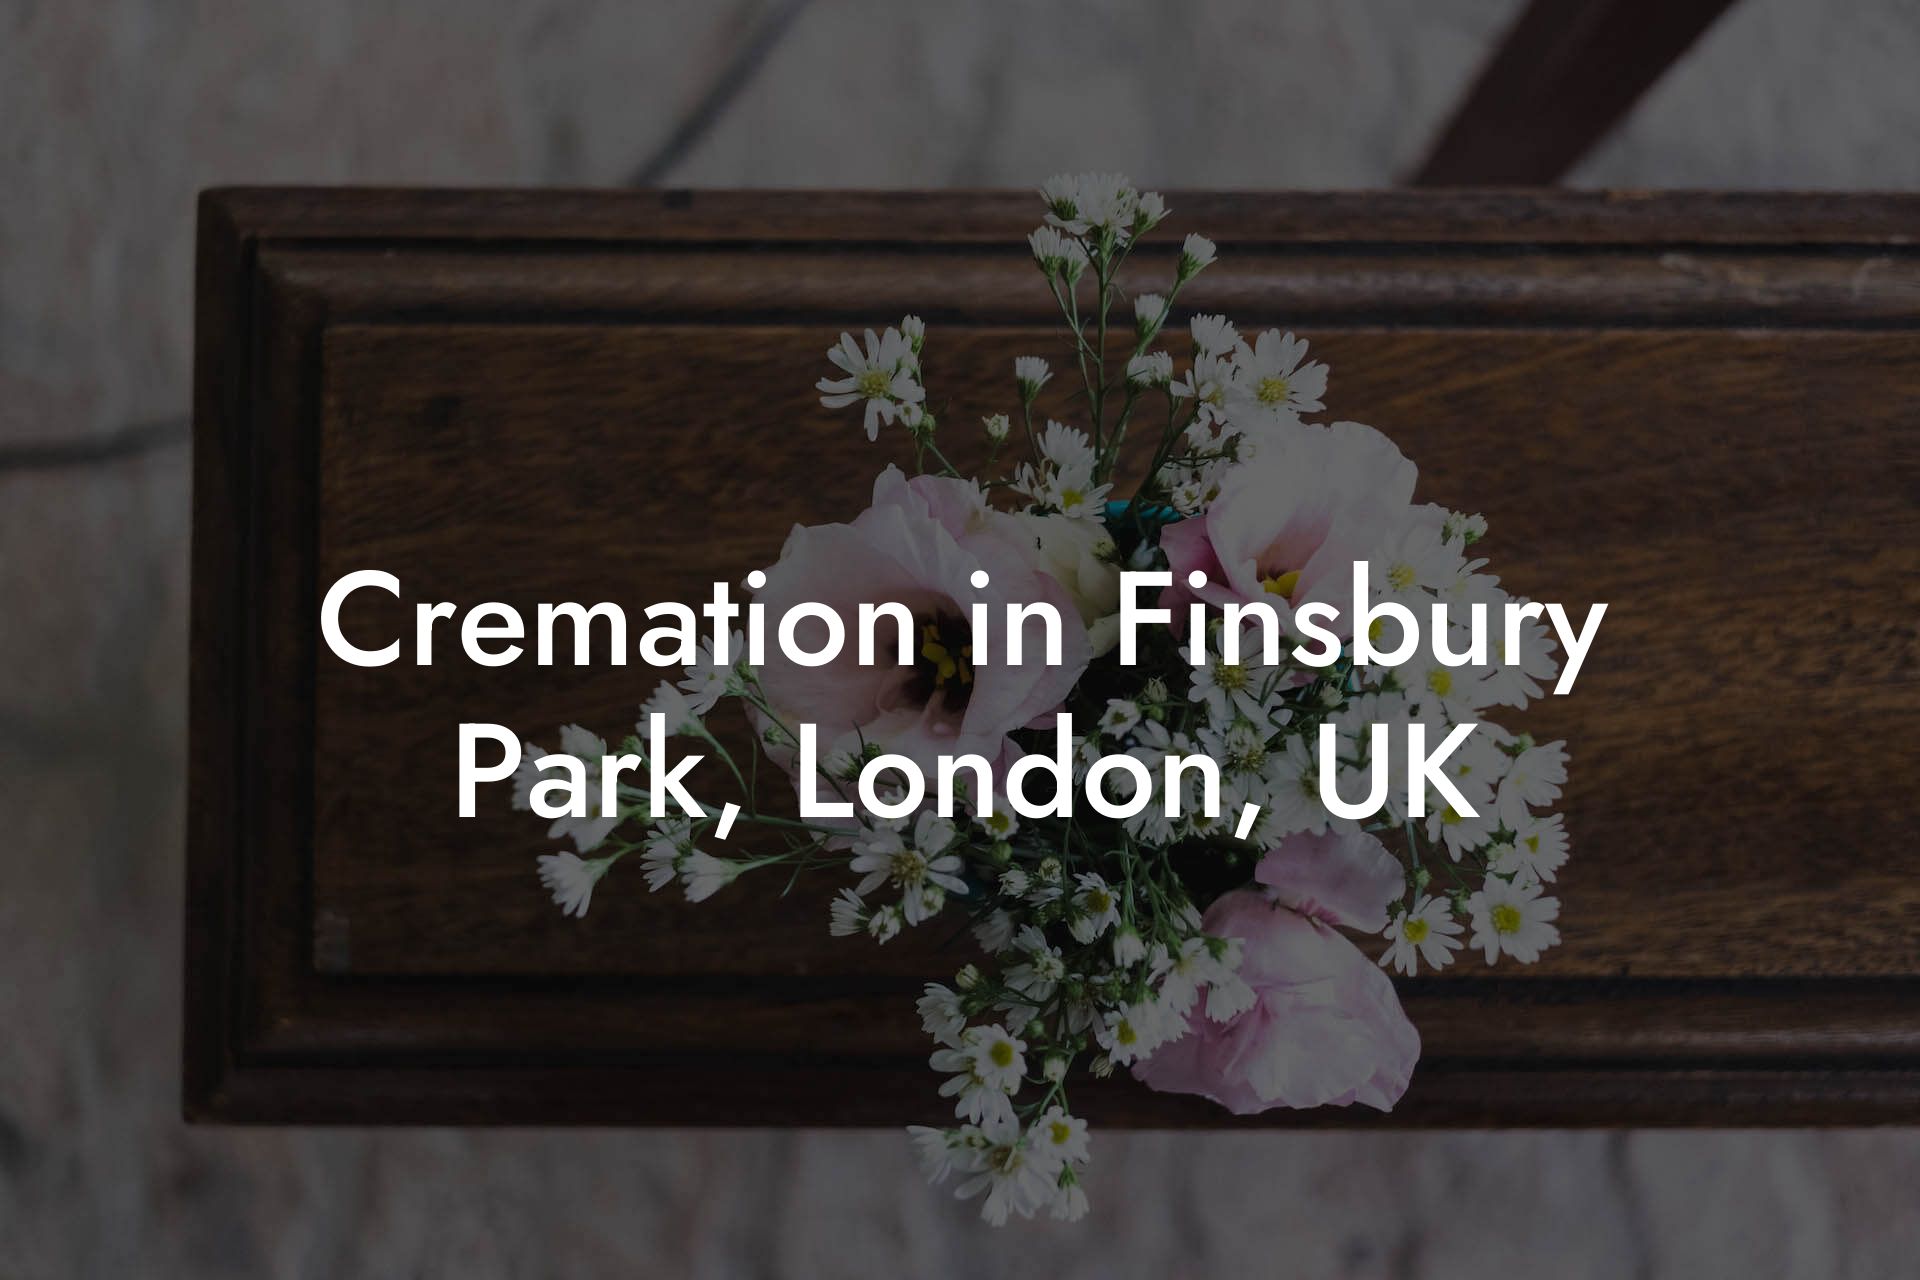 Cremation in Finsbury Park, London, UK